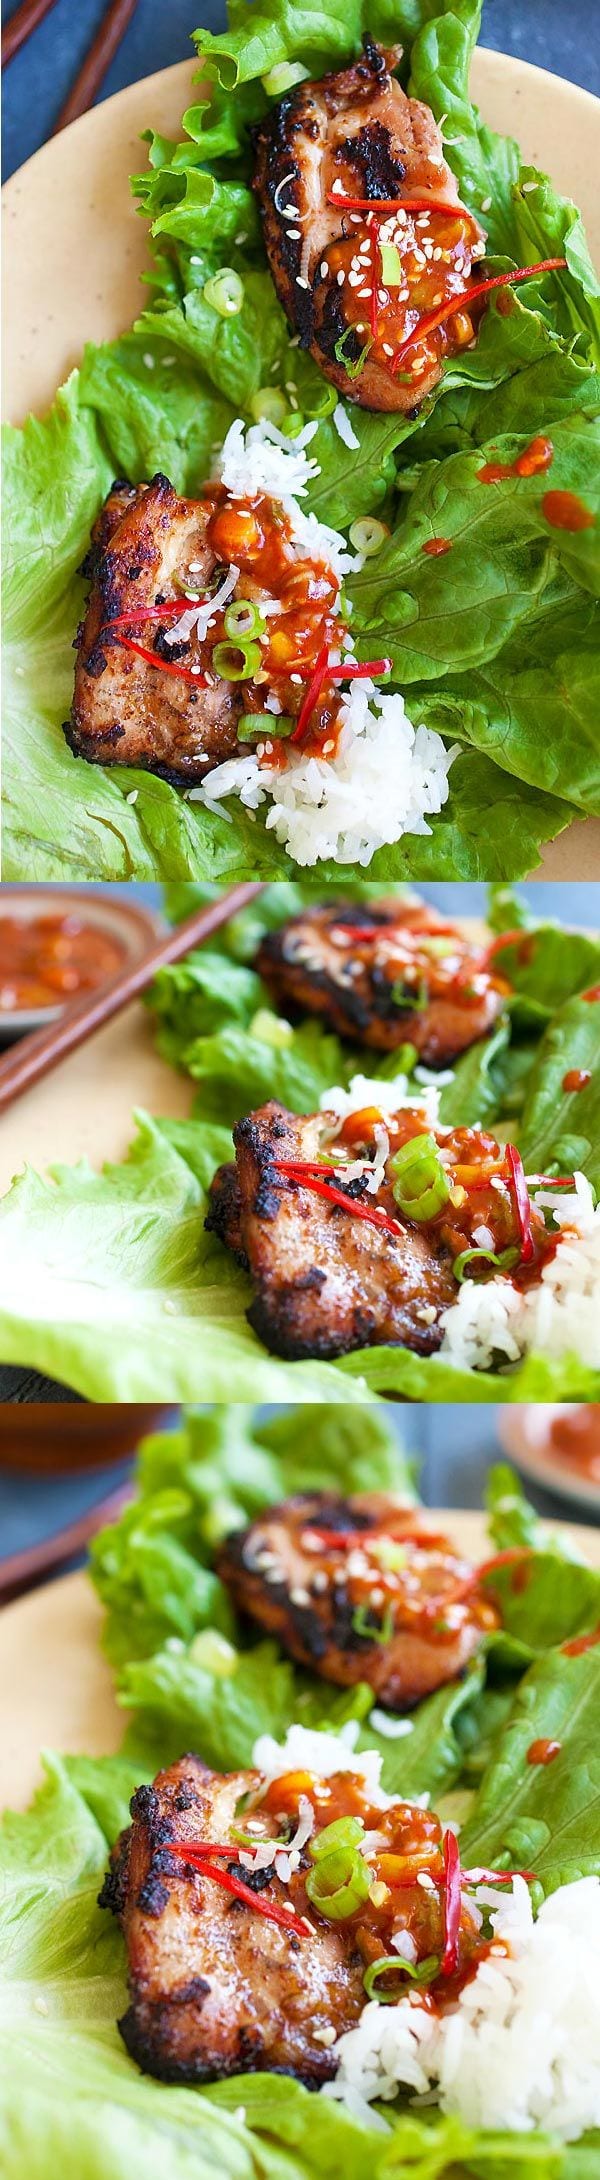 Korean BBQ Chicken (Dak Gogi) – juicy and delicious BBQ chicken served with an amazing Korean spicy dipping sauce. Serve with rice and lettuce leaves | rasamalaysia.com